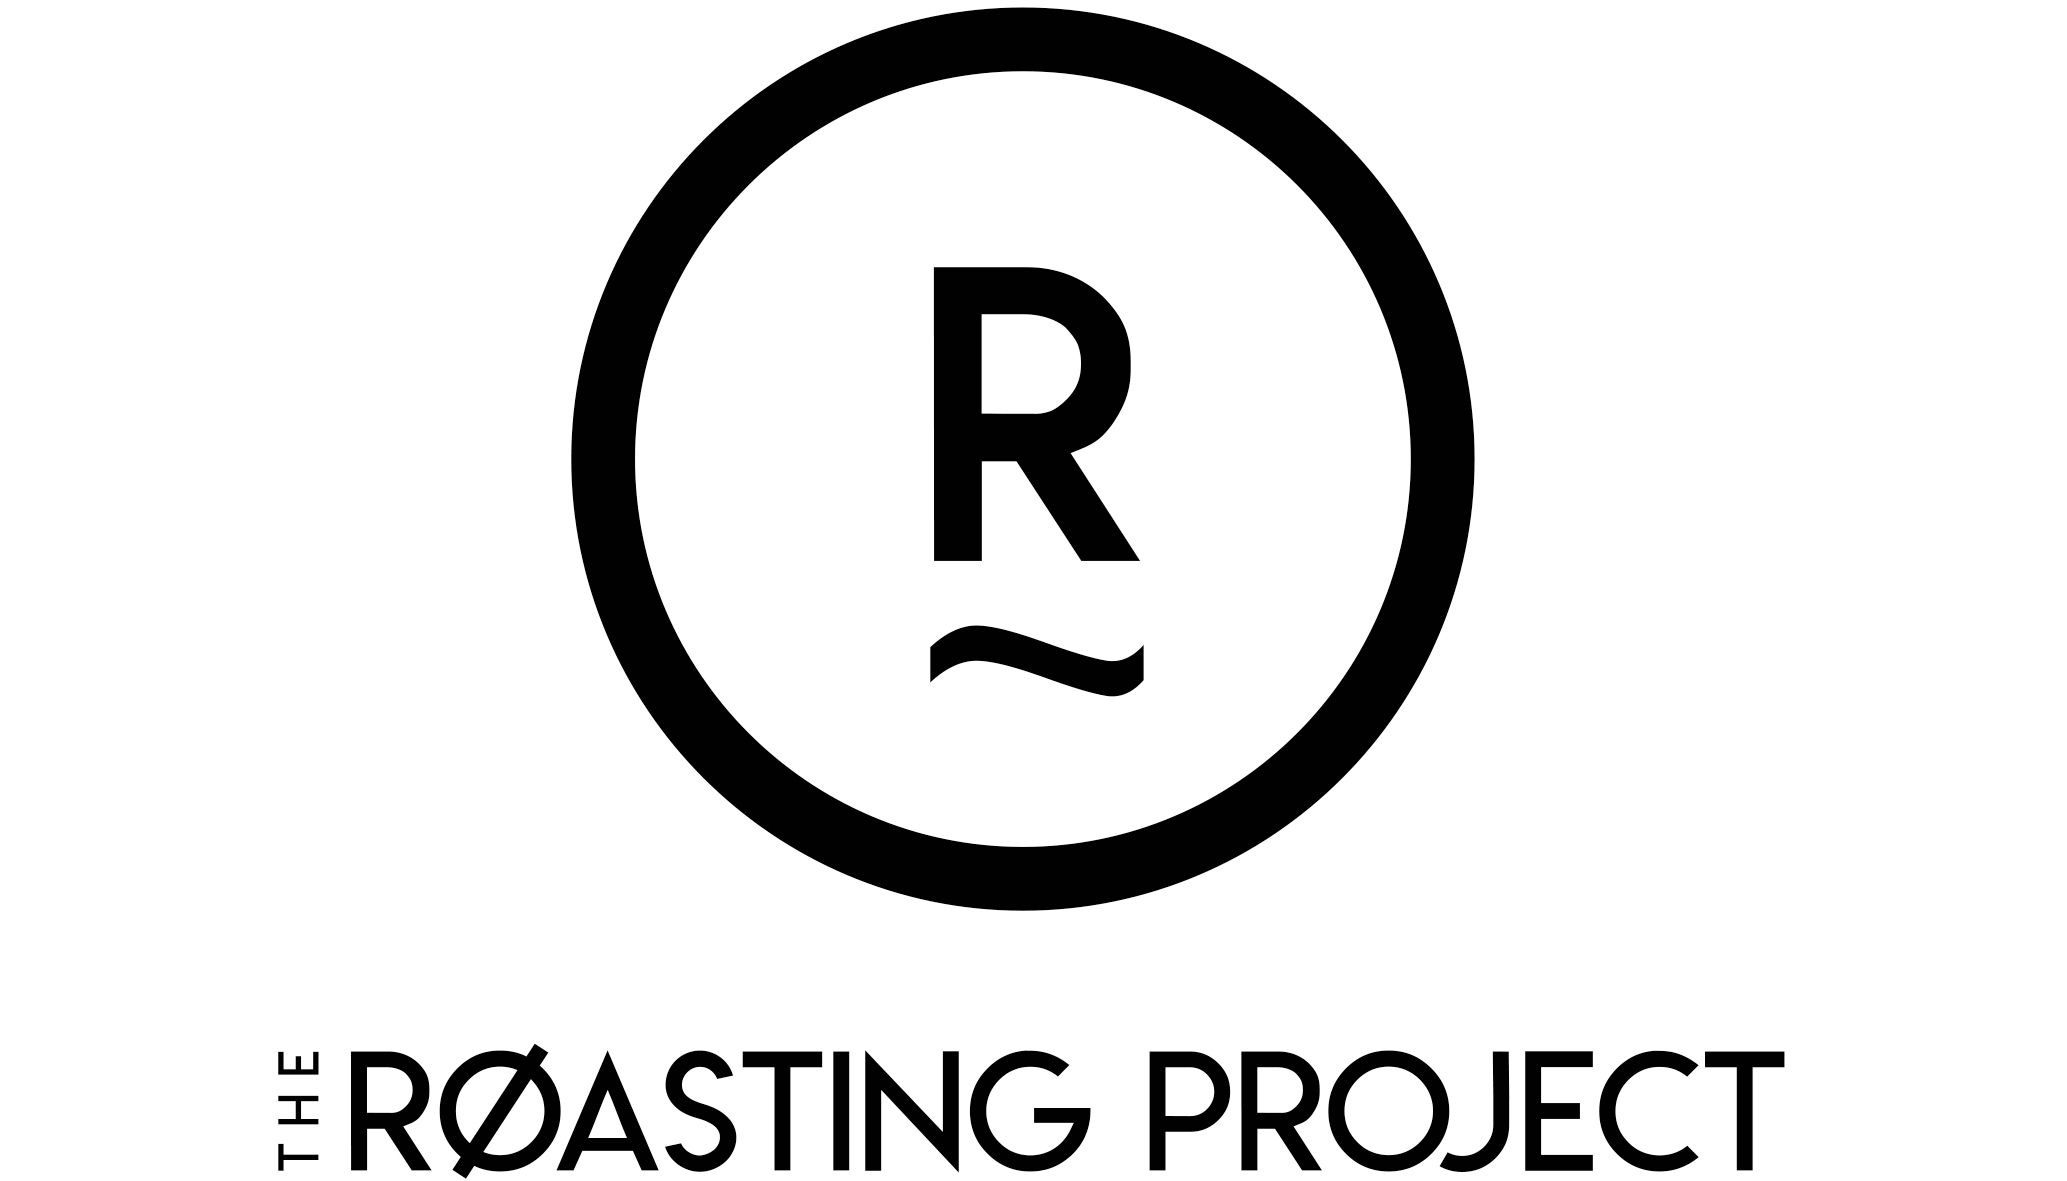 The Roasting Project